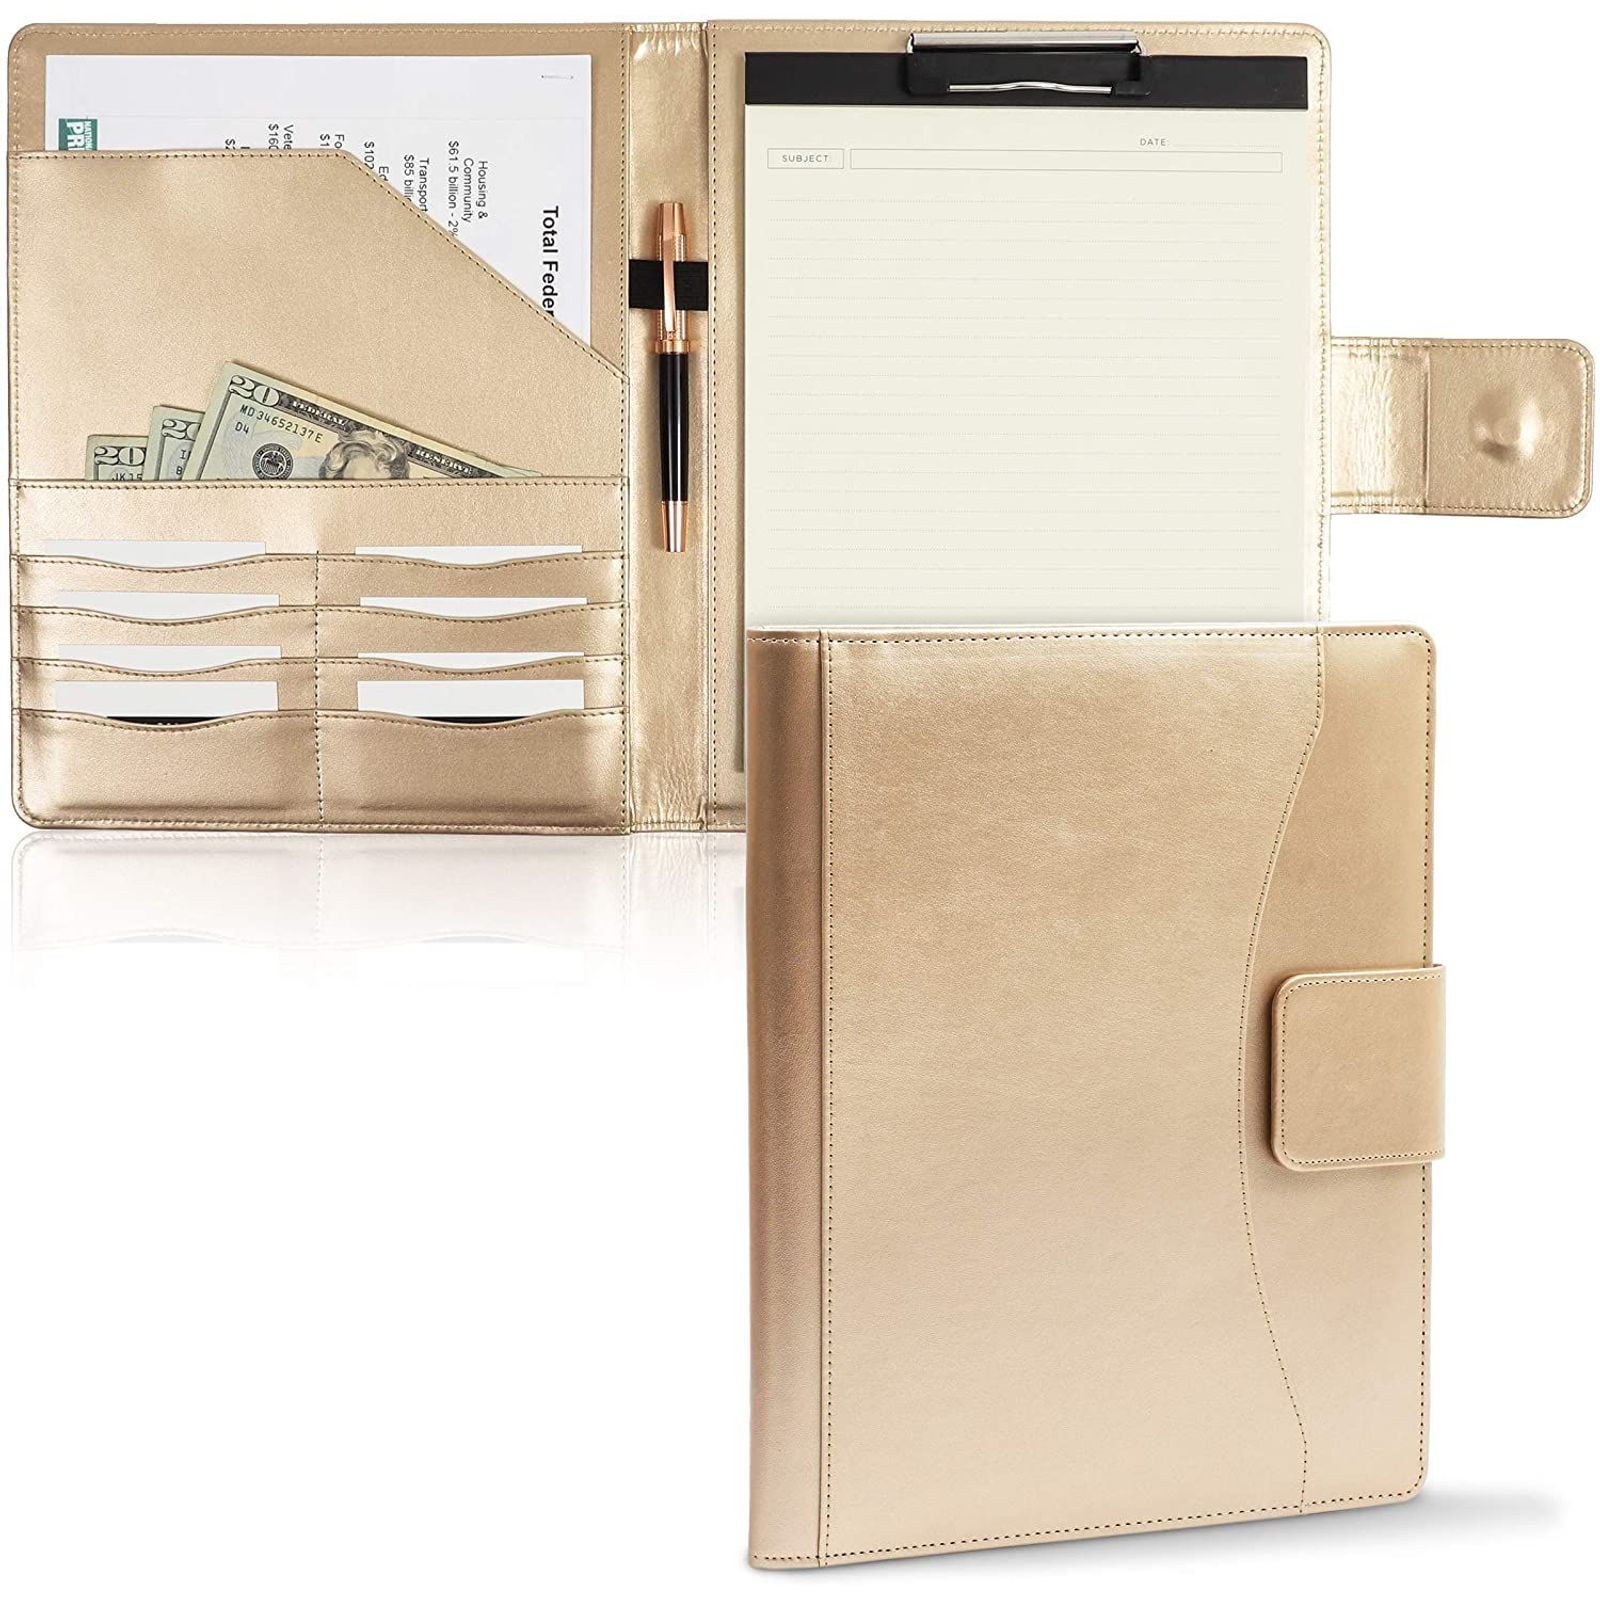 PU Leather Portfolio Case, Executive Clipboard with Pockets for Women, Notepad Included, Champagne